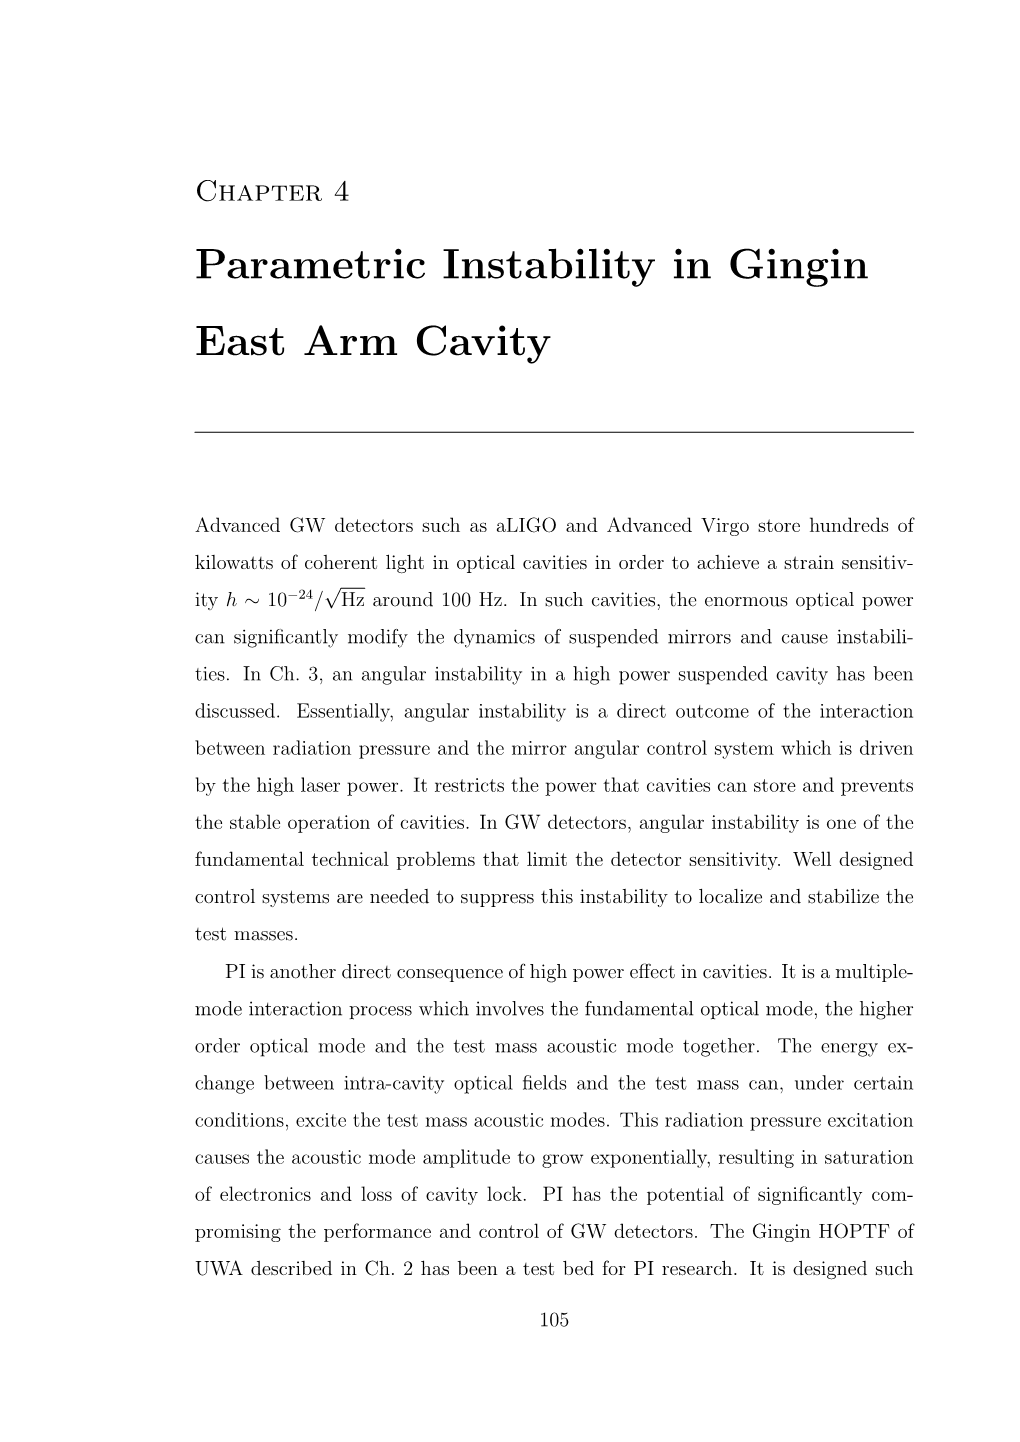 Parametric Instability in Gingin East Arm Cavity